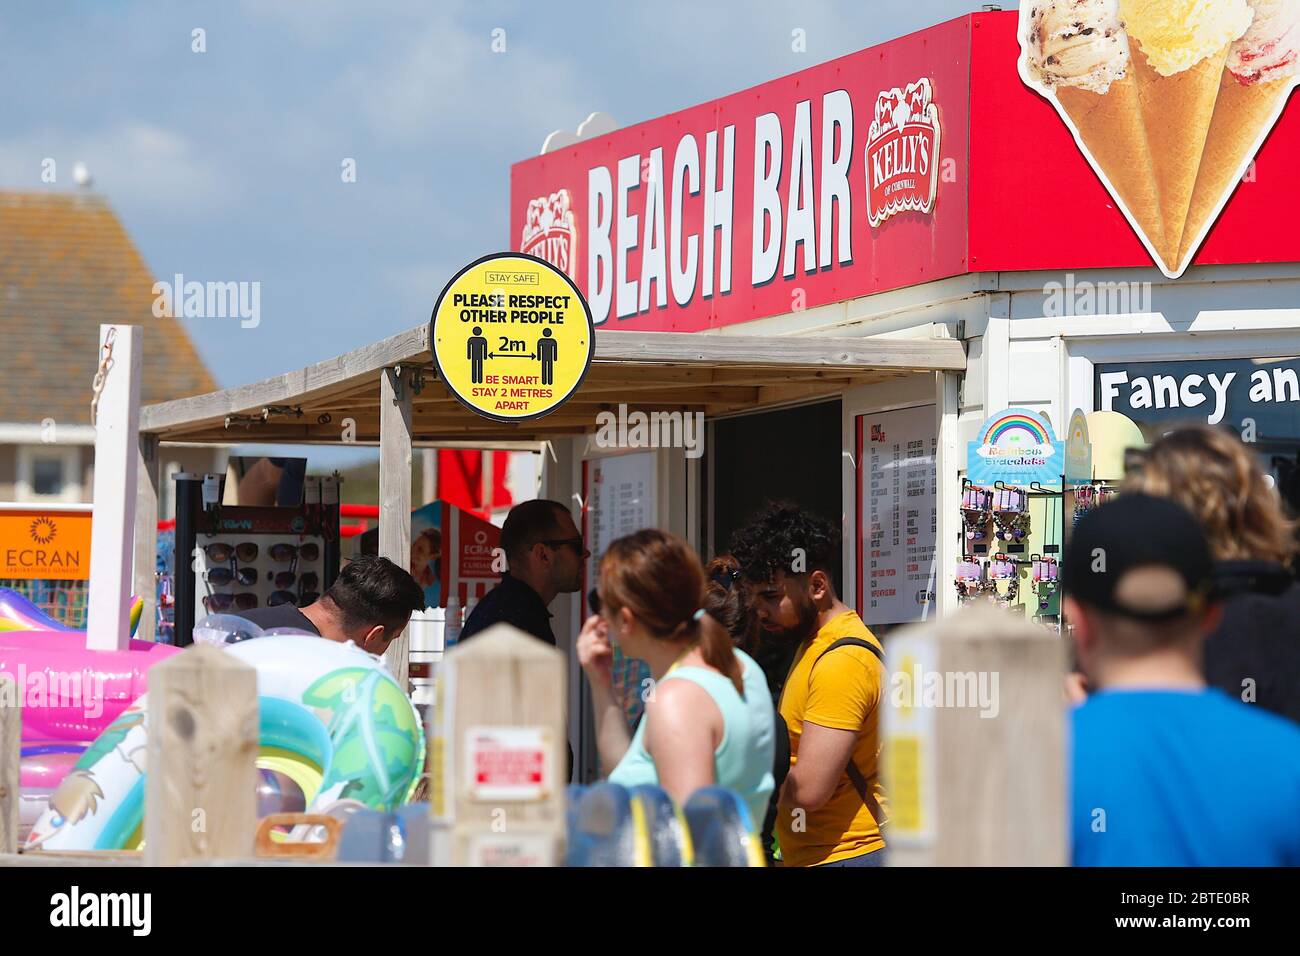 Camber, East Sussex, UK. 25 May, 2020. UK Weather: Camber Sands, East Sussex, beach bar. Social distancing sign at the beach bar. Photo Credit: Paul Lawrenson/Alamy Live News Stock Photo